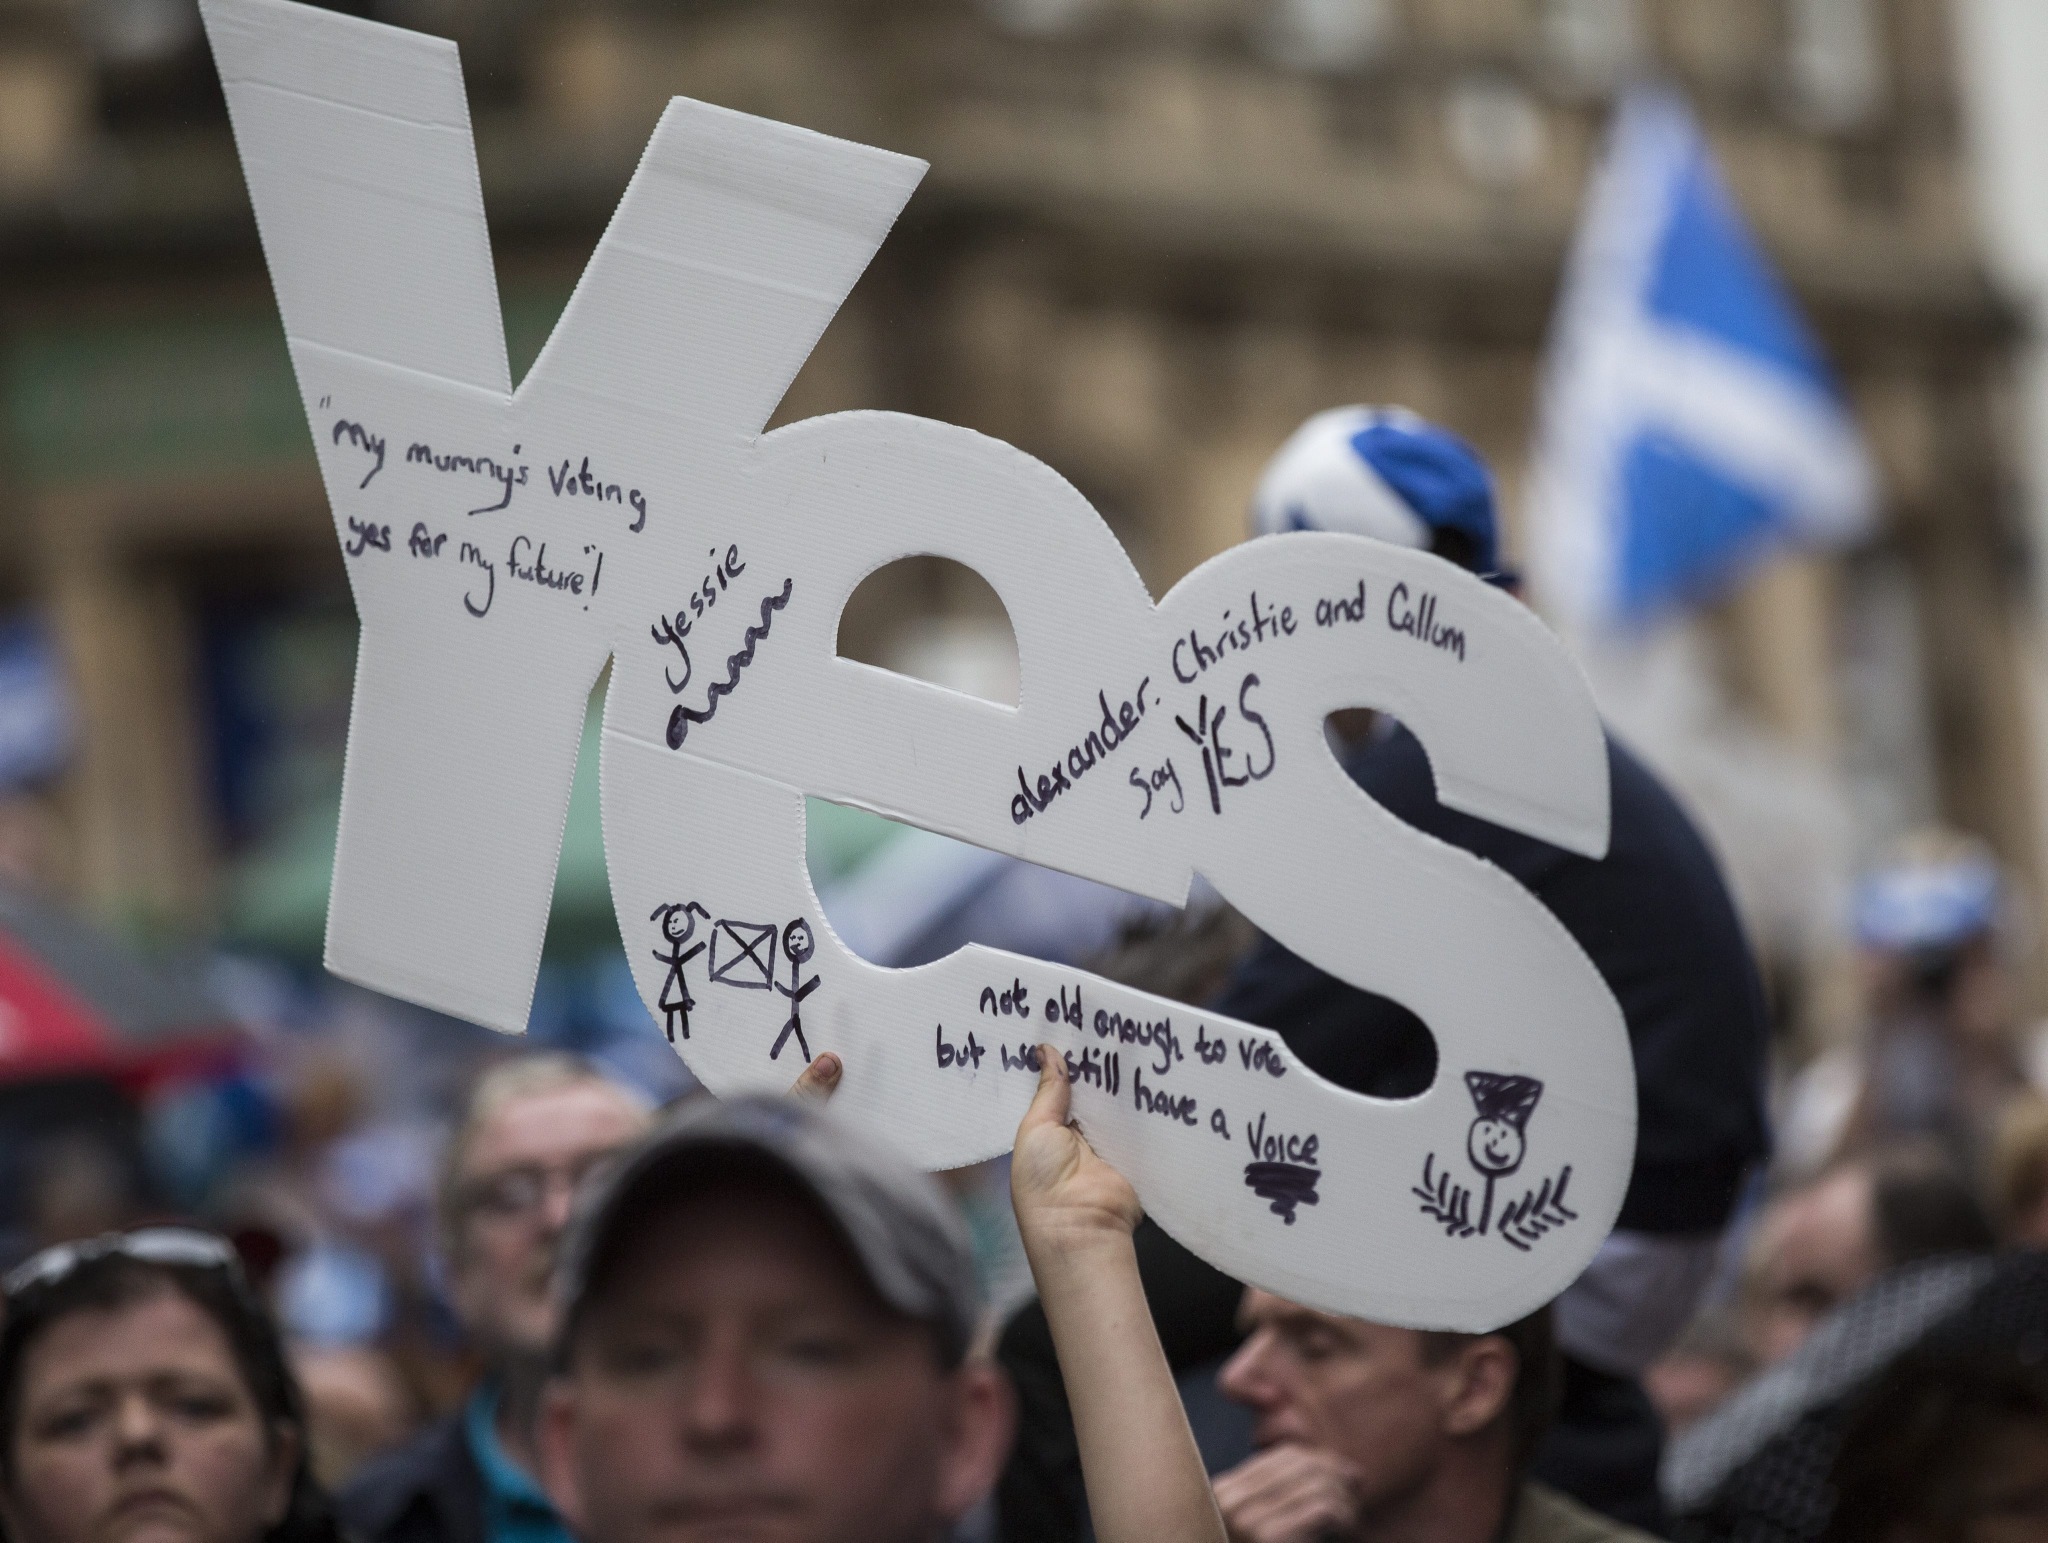 Beijing sees the idea of Scottish independence as a disruptive force. Photo: EPA